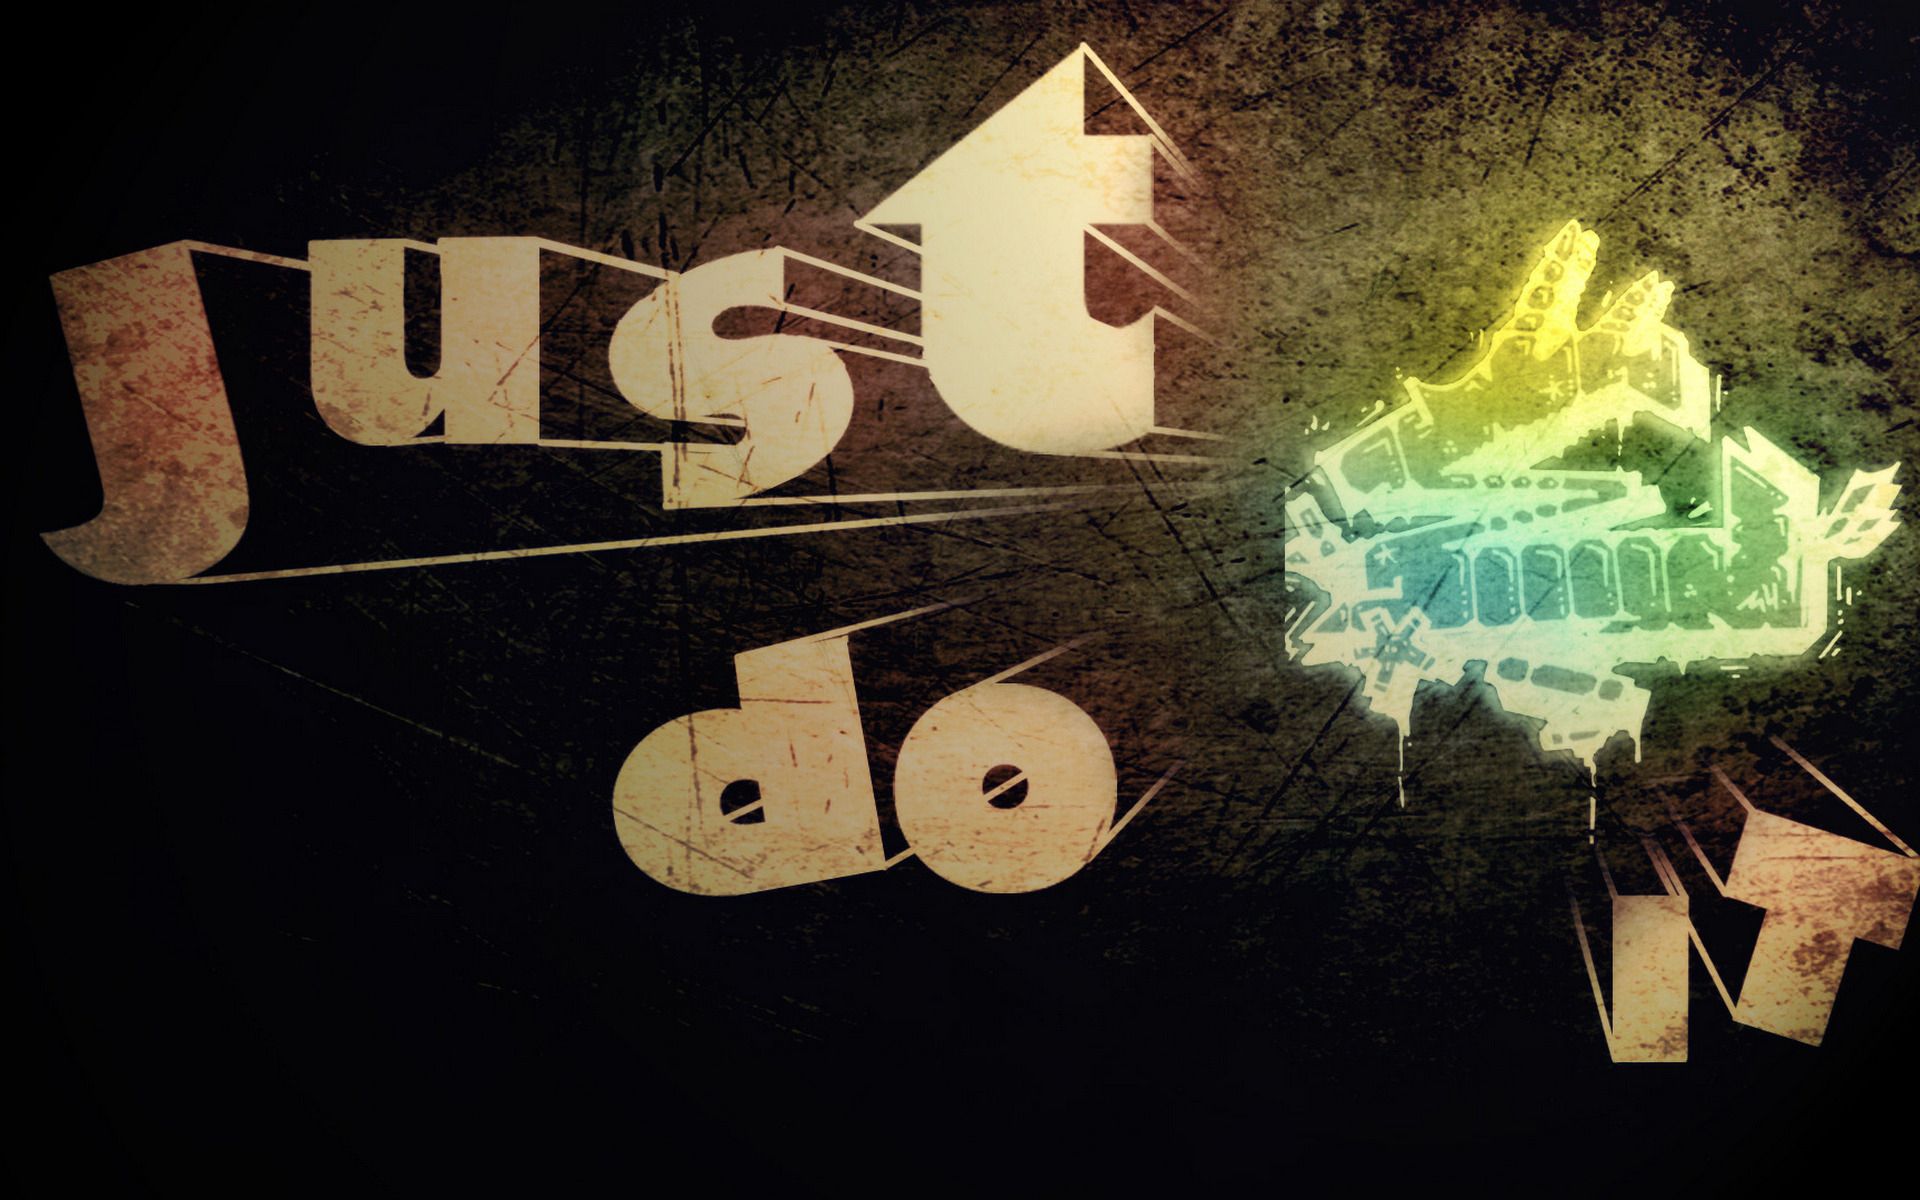 Just-do-it-high-definition-1080p | wallpapers55.com - Best ...